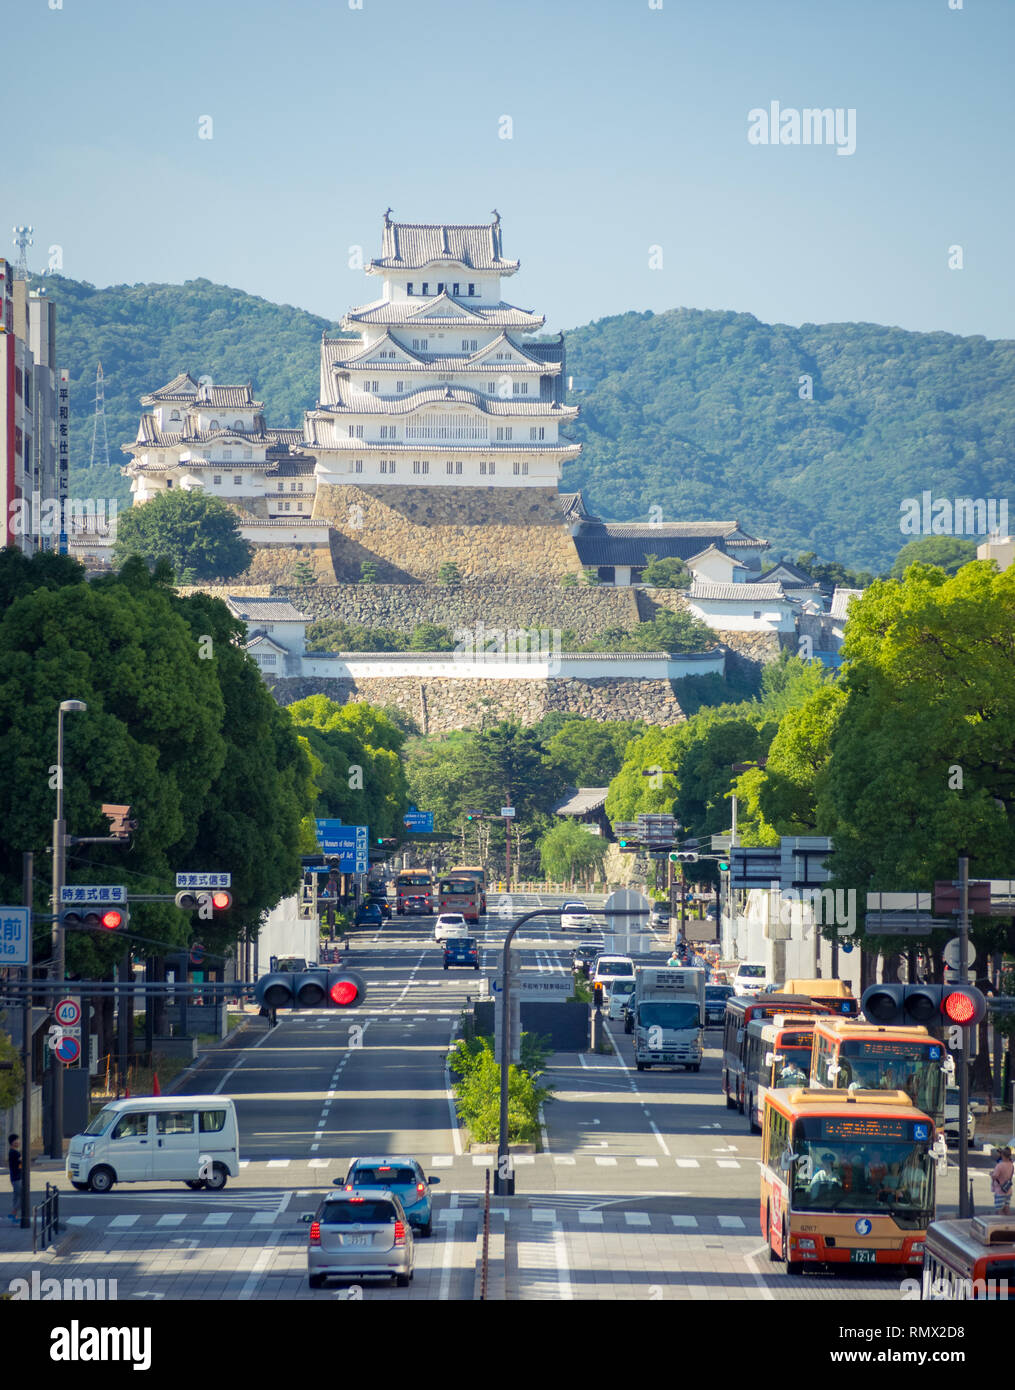 A view of Ootemae-dori (Ootemae Street), the main street, and Himeji Castle (Himeji-jo) rising in the background, in Himeji, Hyogo Prefecture, Japan. Stock Photo